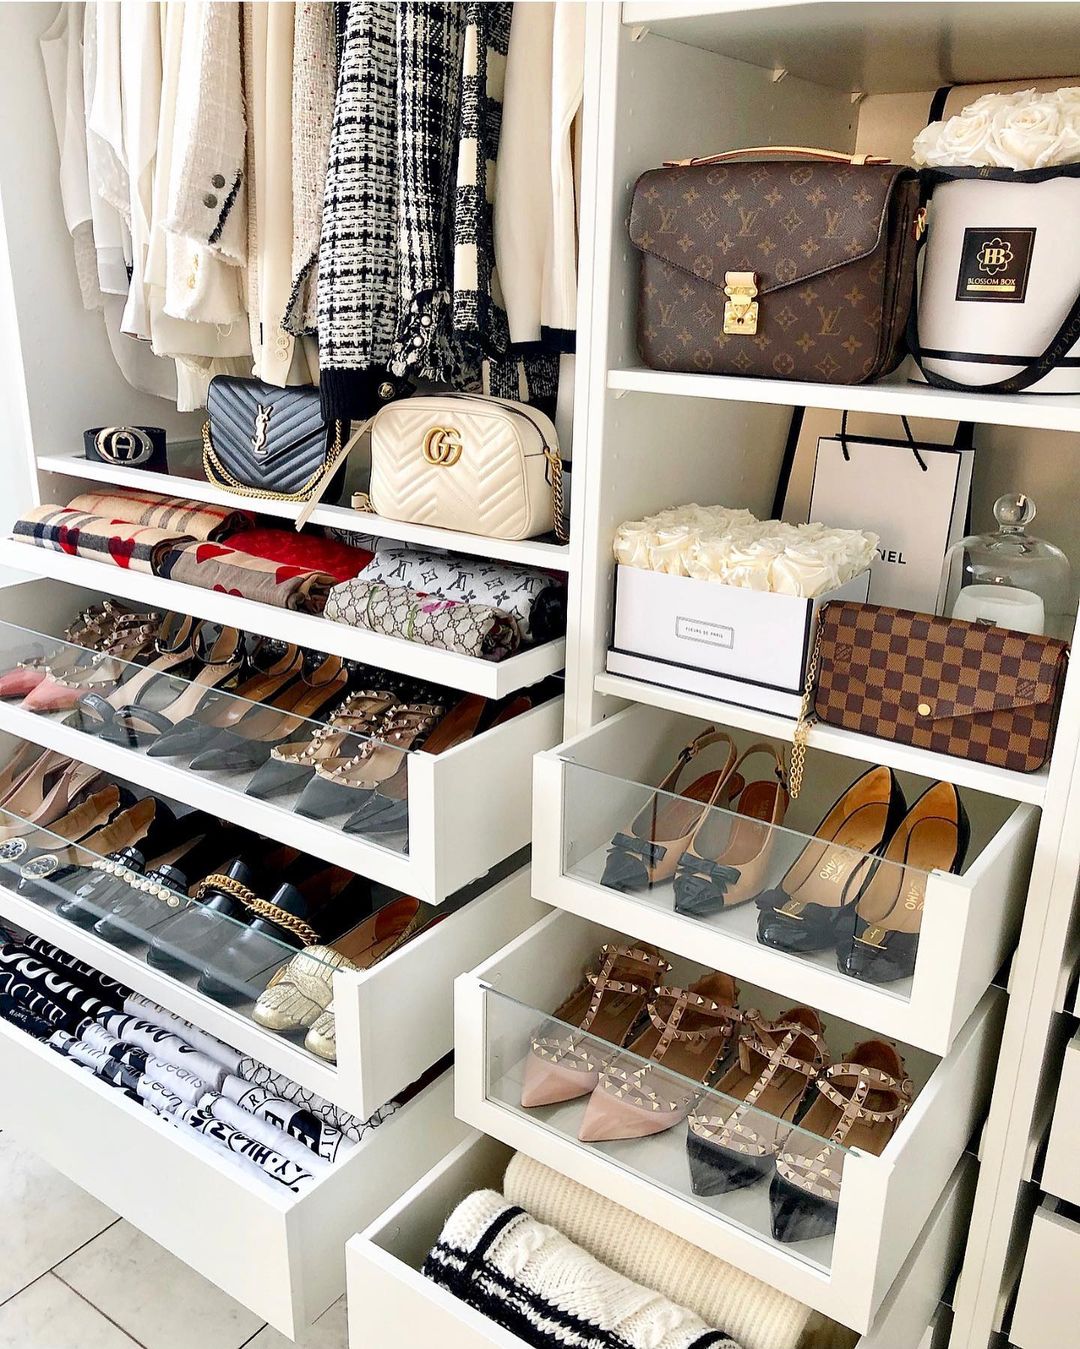 How To Organize Shoes In Closet Design